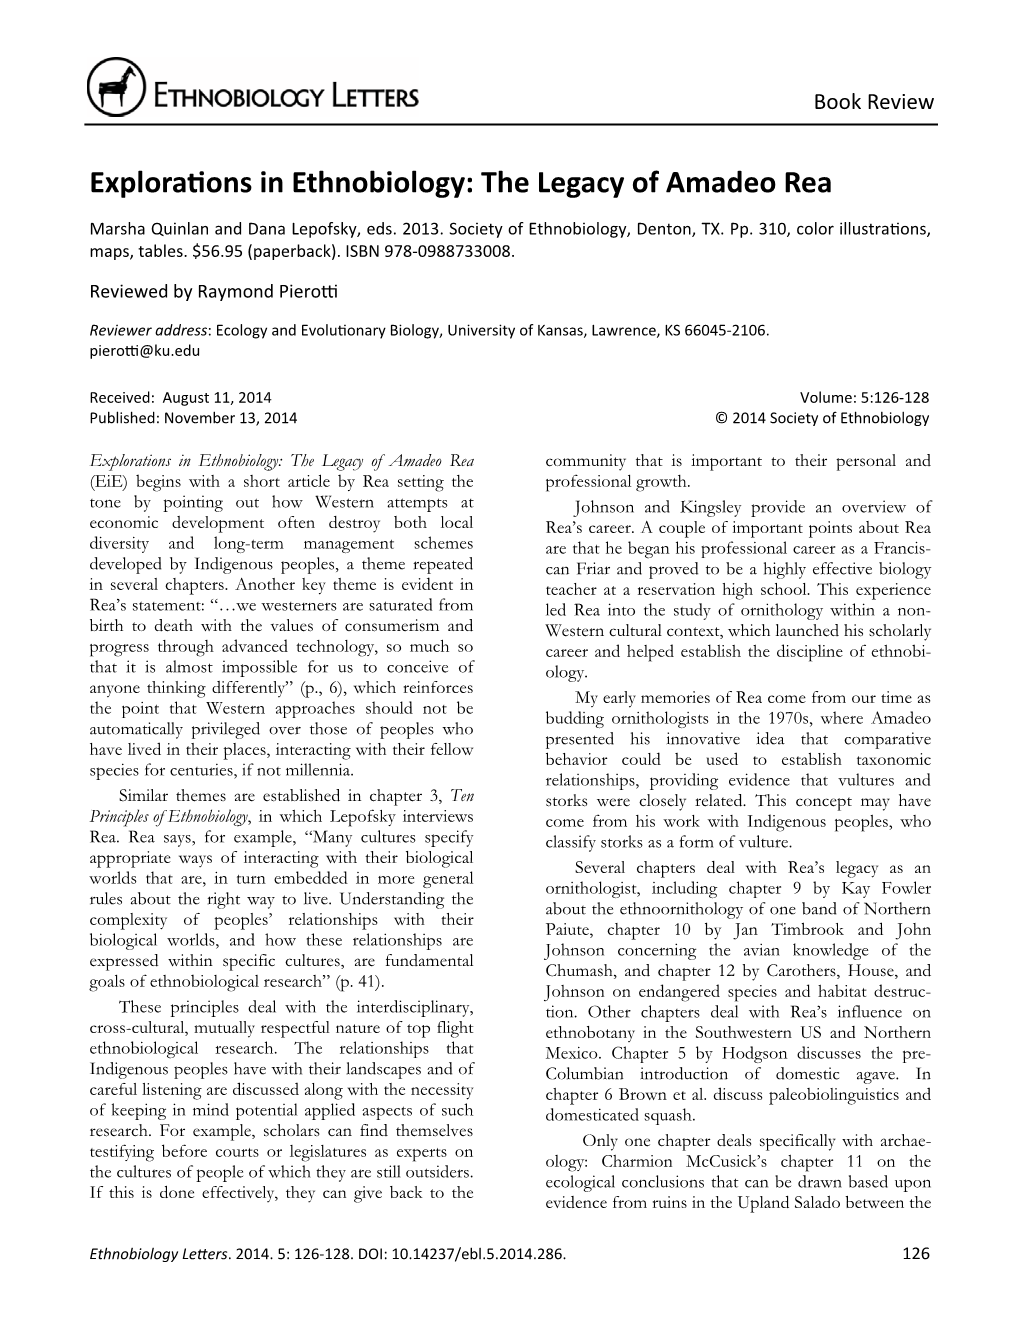 Explorations in Ethnobiology: the Legacy Of